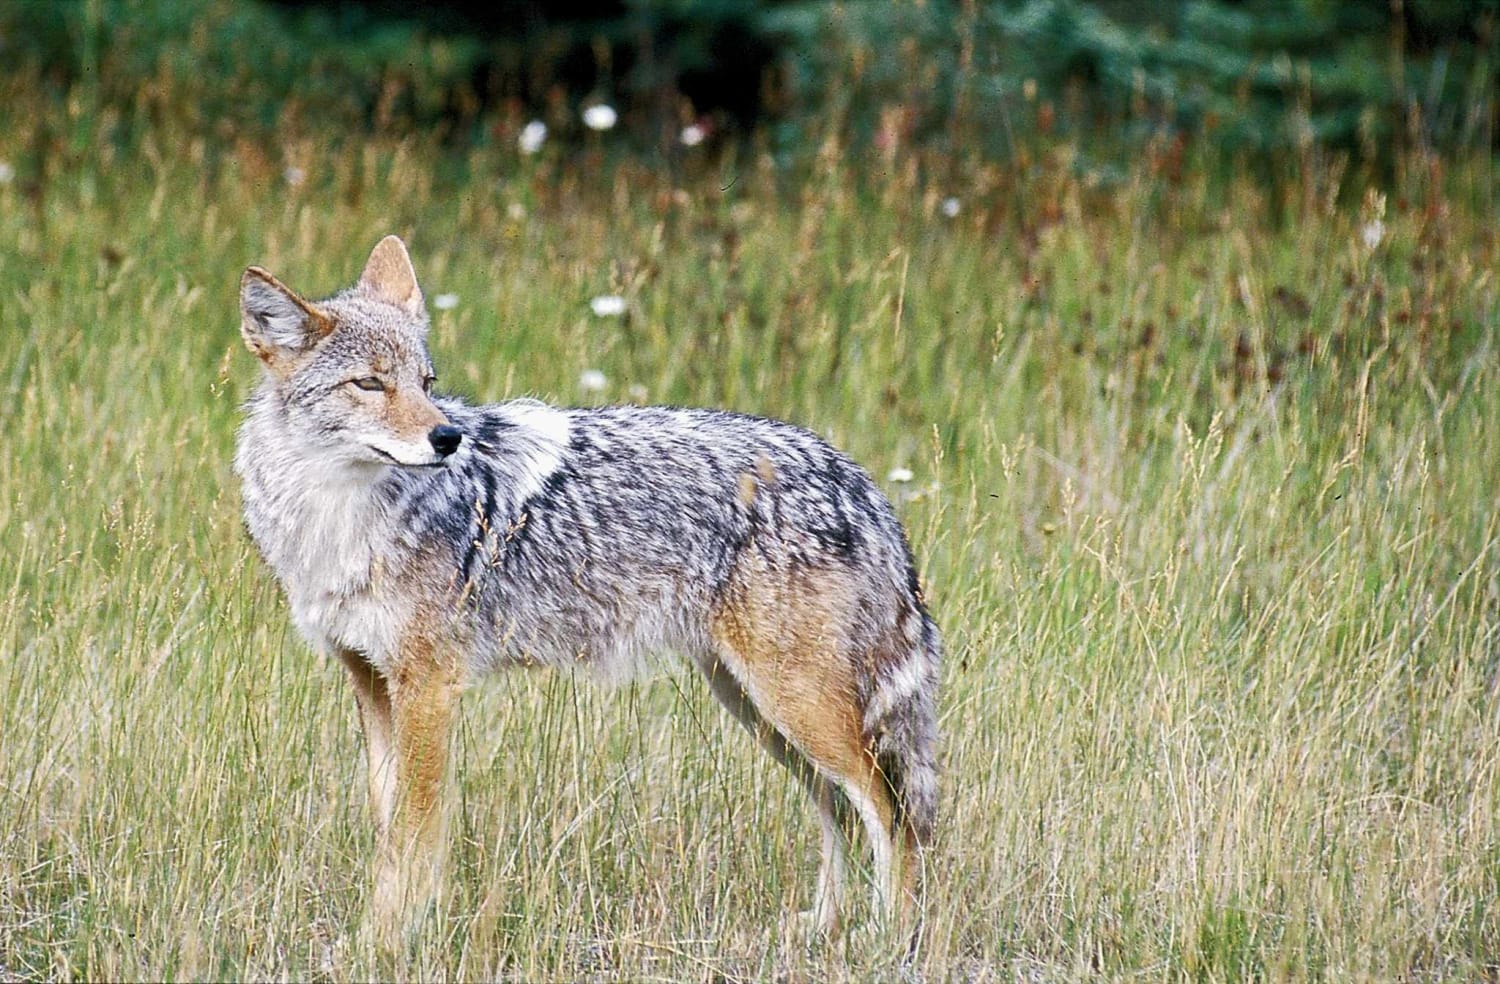 East Haddam woman fights coyote off with pitchfork, aided by donkey